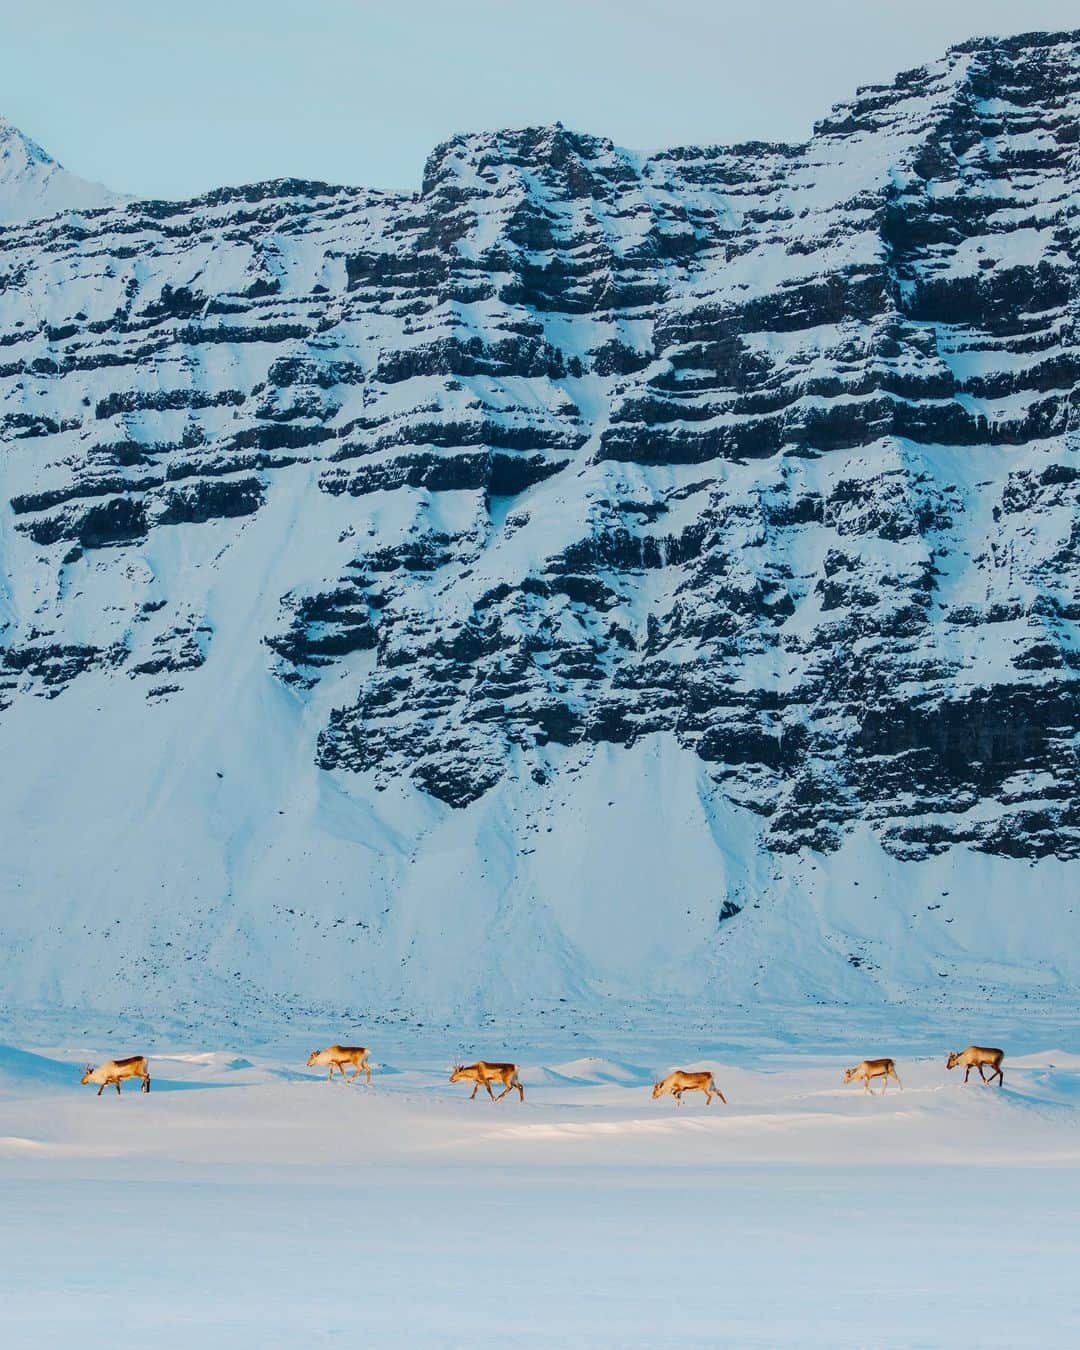 Alex Strohlのインスタグラム：「The last sun rays of the day on a herd of wild reindeer in the south coast of Iceland. When you’ve experienced the weather in this part of the country in the winter, you really develop even more respect for these animals… In the summer they spend time in the highlands, and in the winter, they migrate to the lower elevations in search of grasslands. Tough time for this herd as the snow was deep all the way to the ocean.」